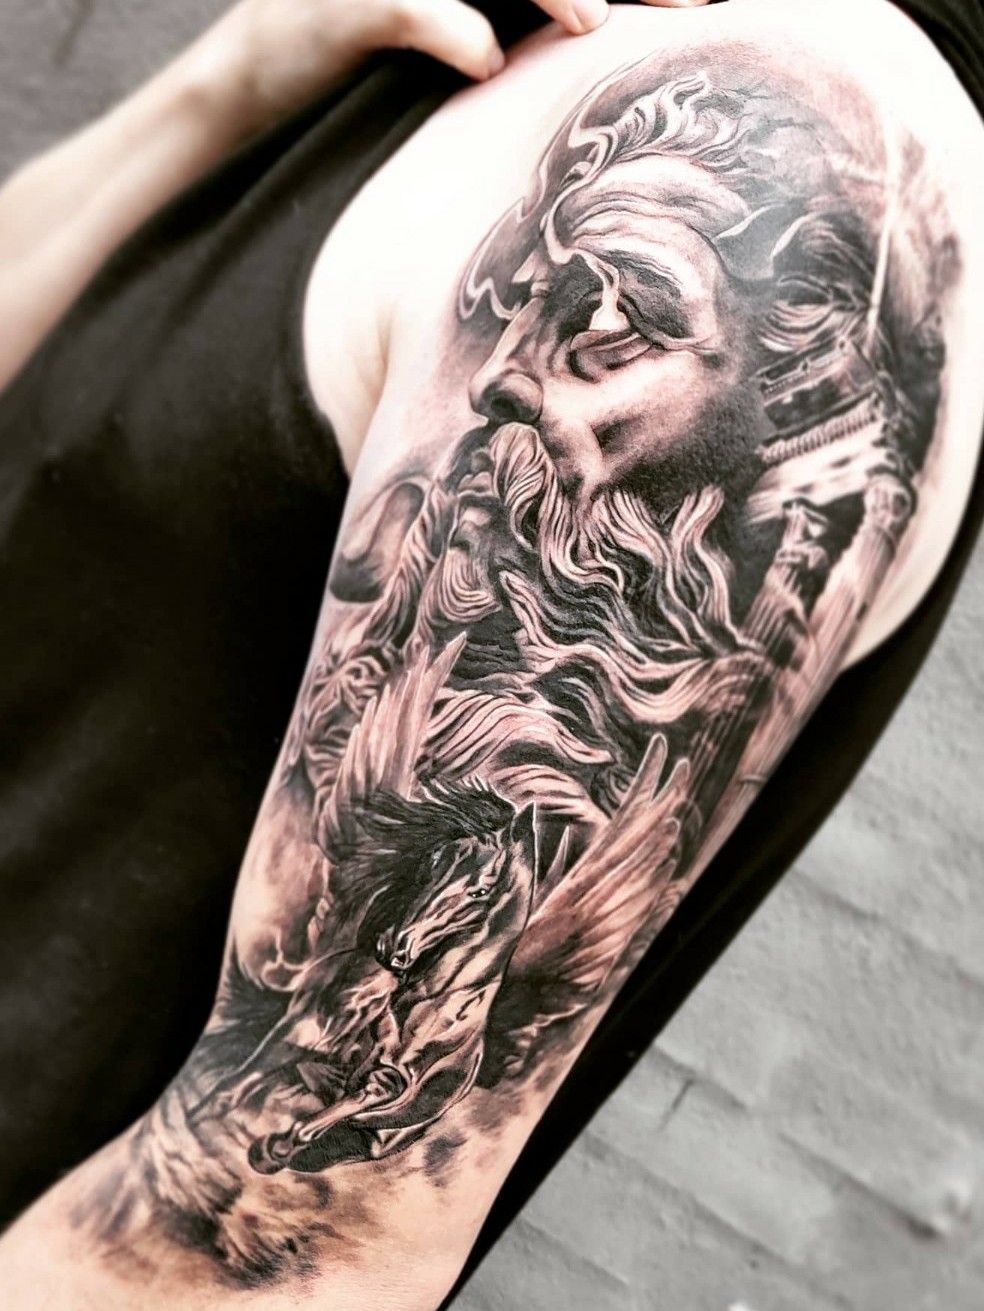 what u guys think i should add to my arm to match this fallen angel tattoo  (icarus from greek mythology) : r/TattooDesigns